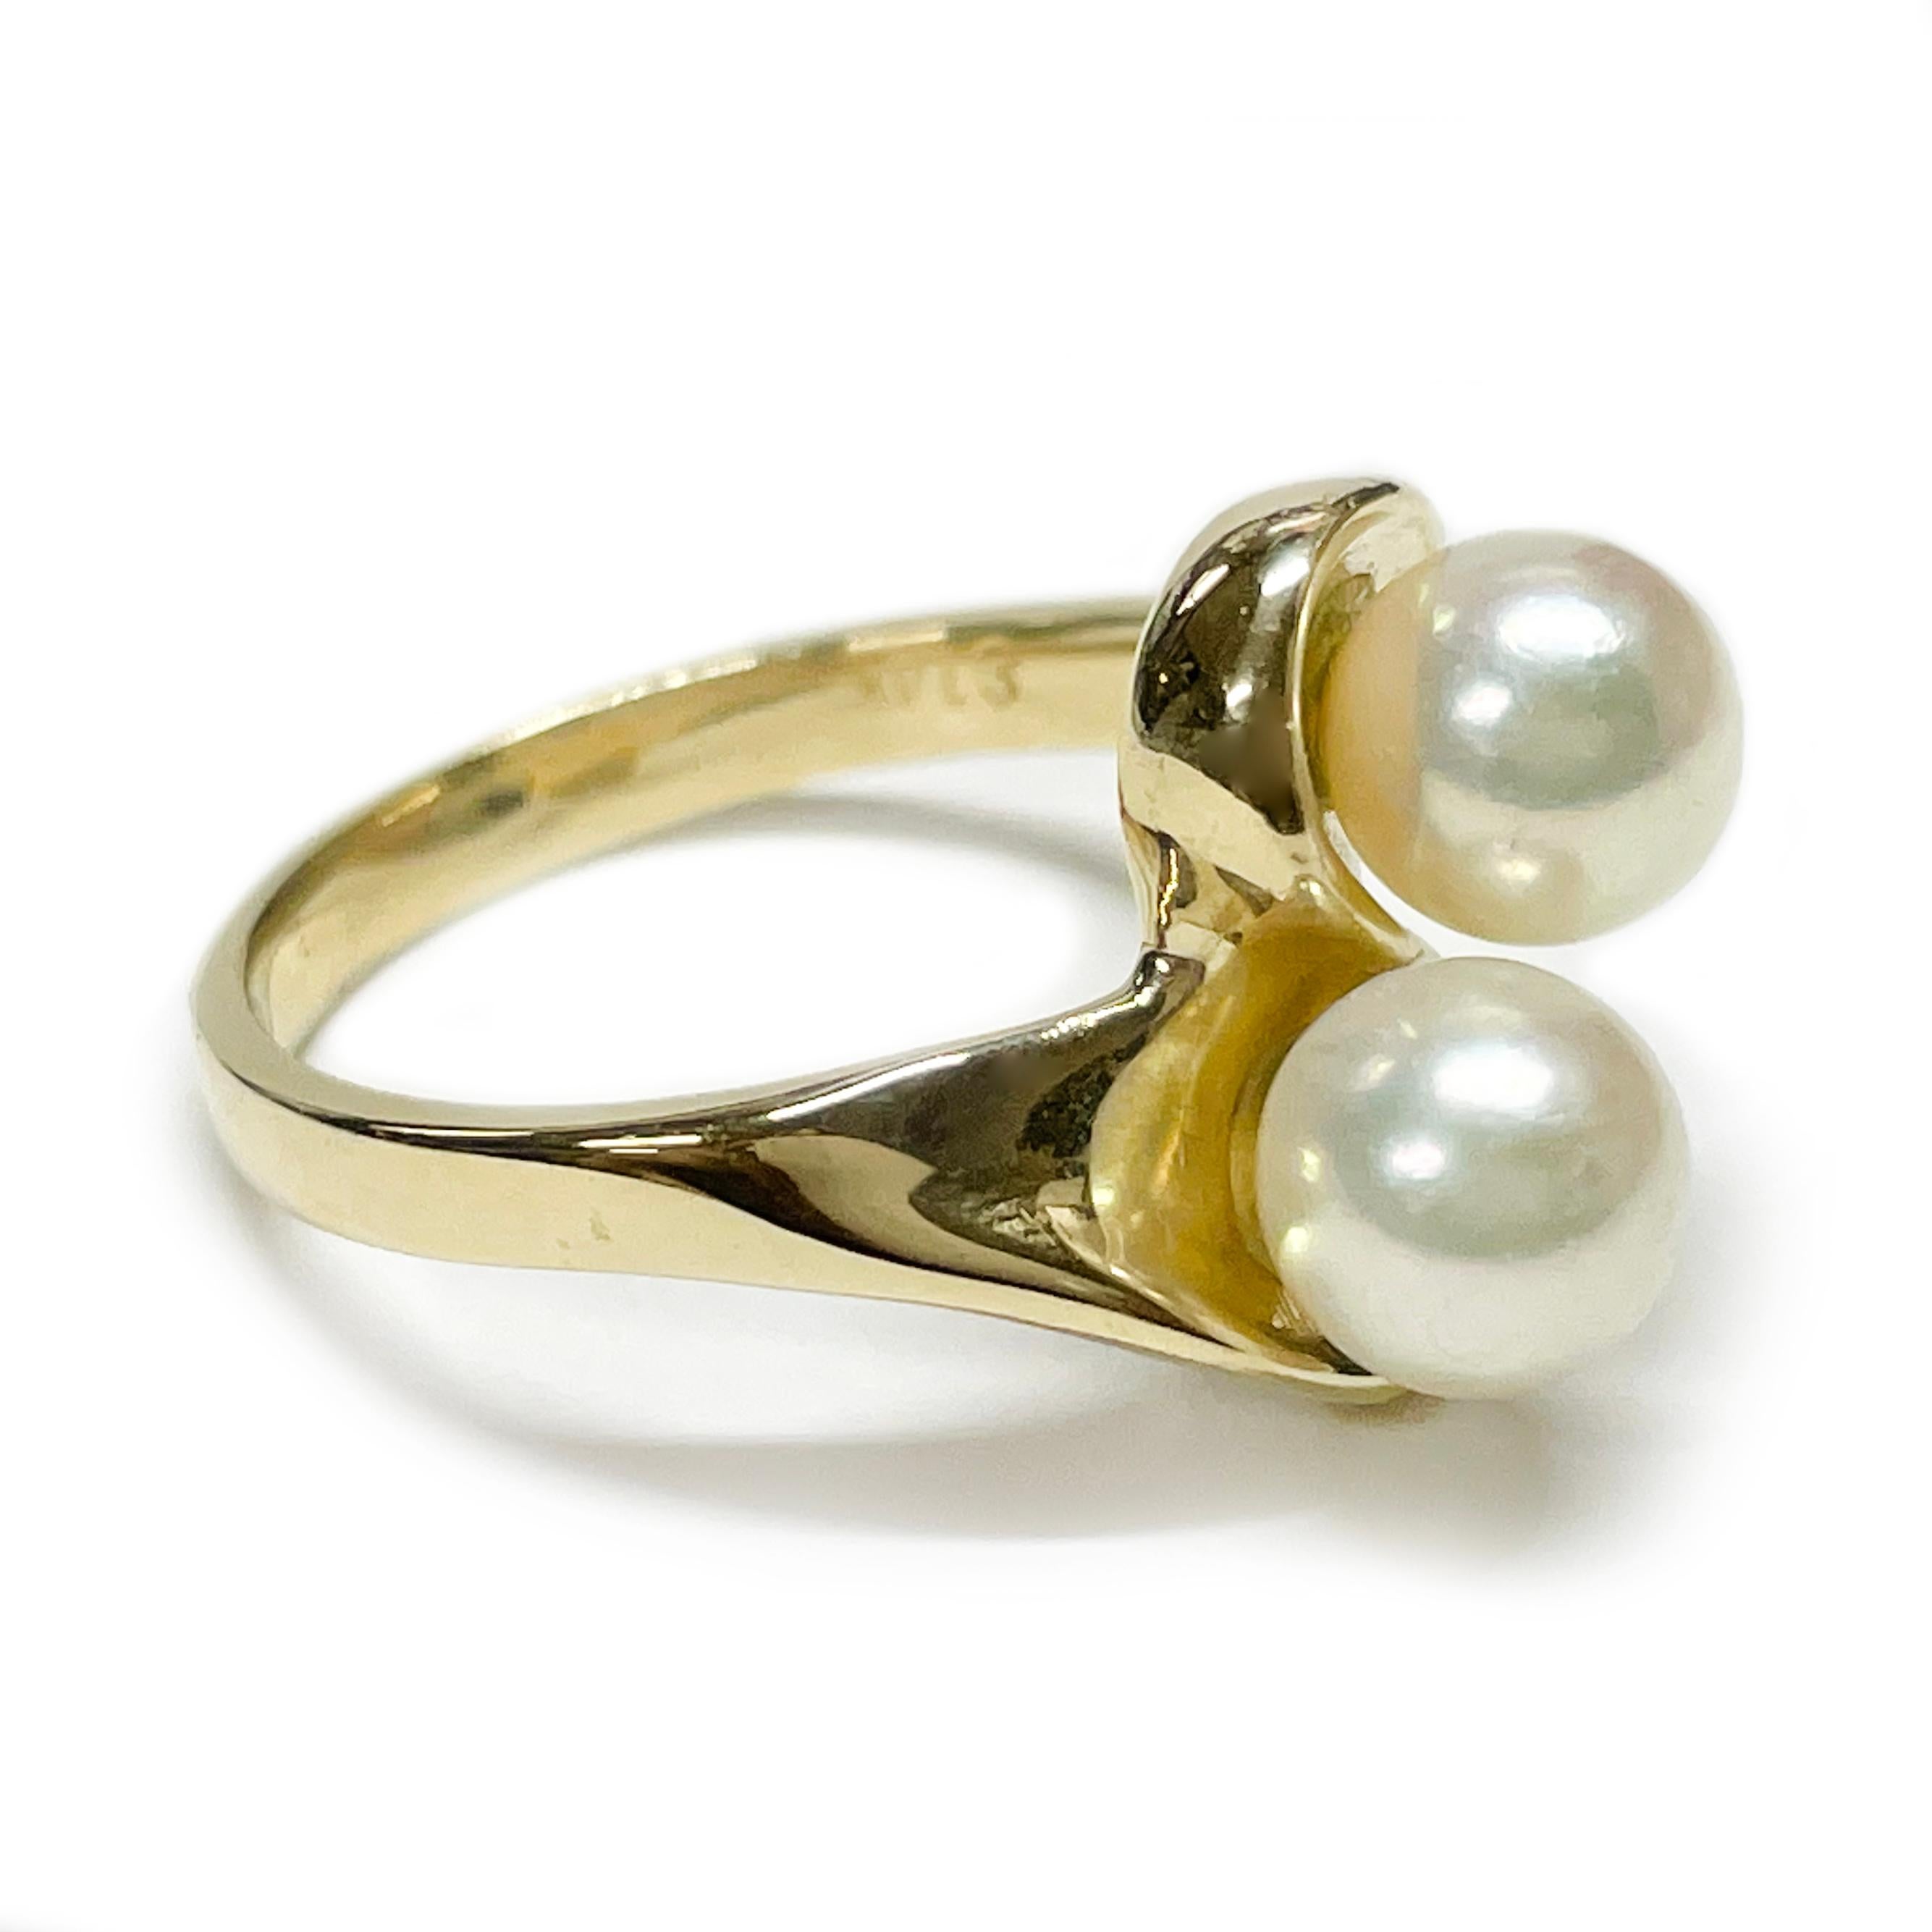 14 Karat Yellow Gold Two Pearl Ring. The ring features two swooshes for the band that meet at the center and have a pearl each. The two round 6.5mm cultured pearls are creamy white in color with good luster. Stamped on the inside of the band is E